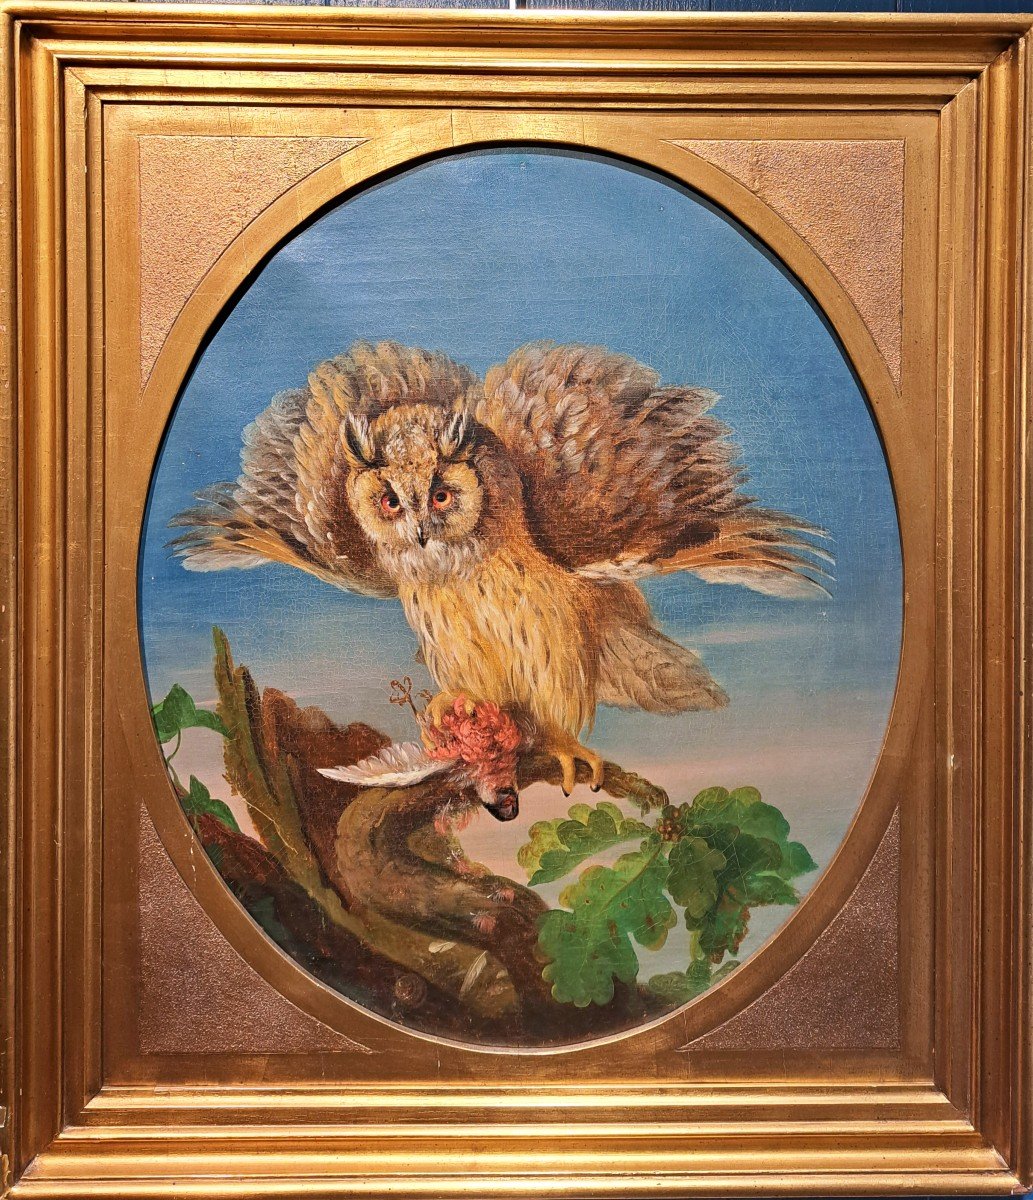 Follower Of Jean Jacques Bachelier (1724-1806), The Owl And Its Prey, Oil